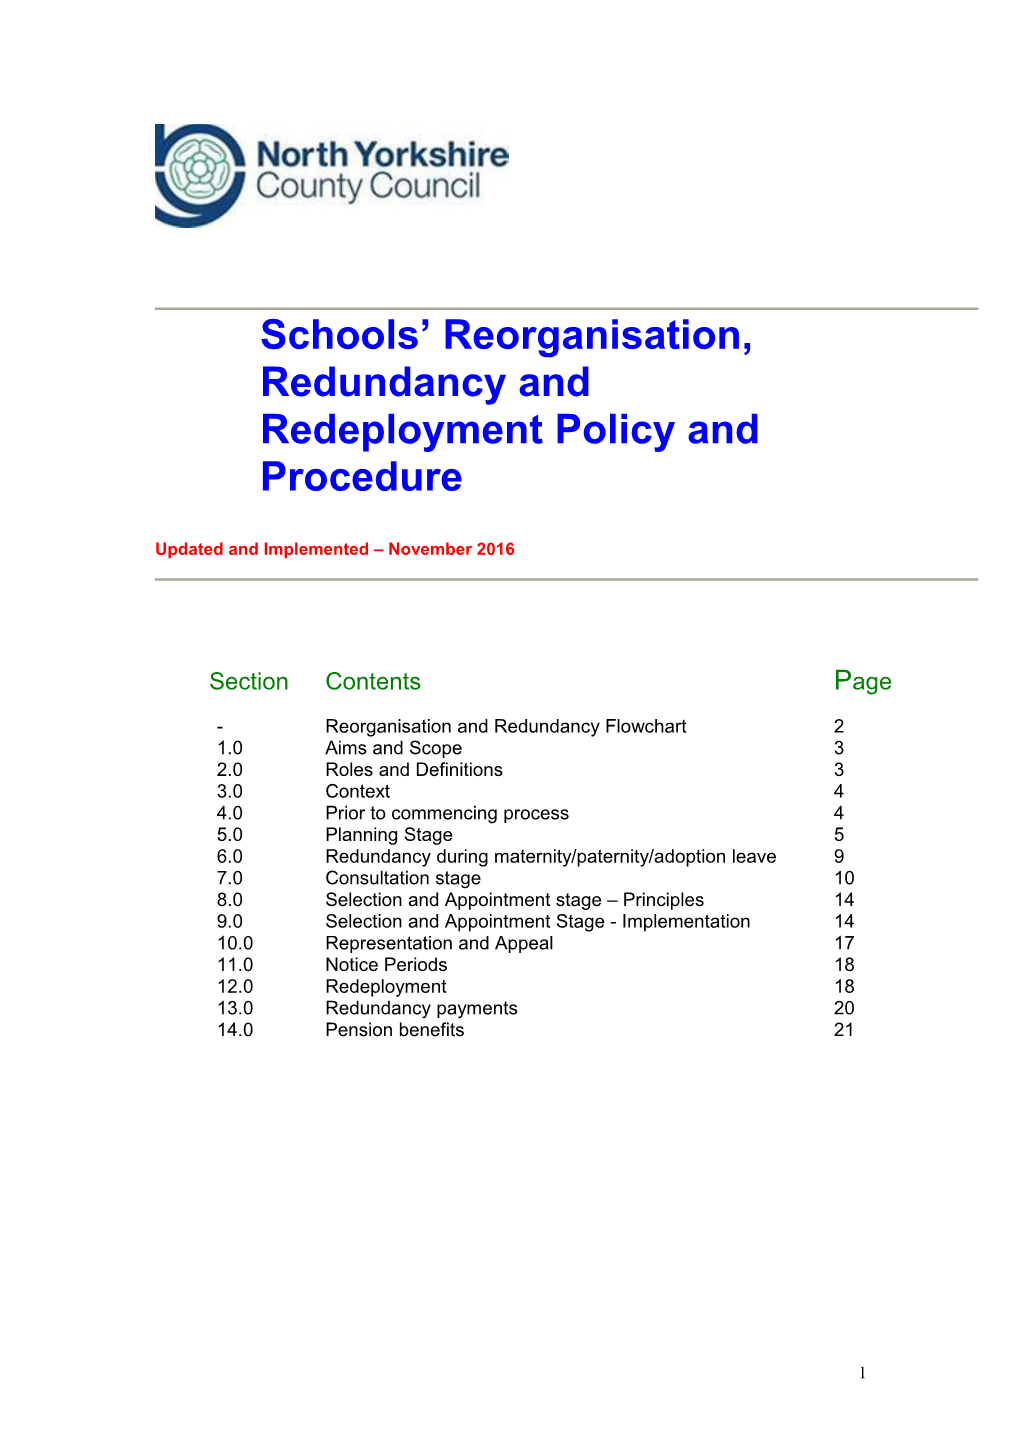 HA Added - Schools' Reorganisation, Redundancy and Redeployment Policy and Procedure